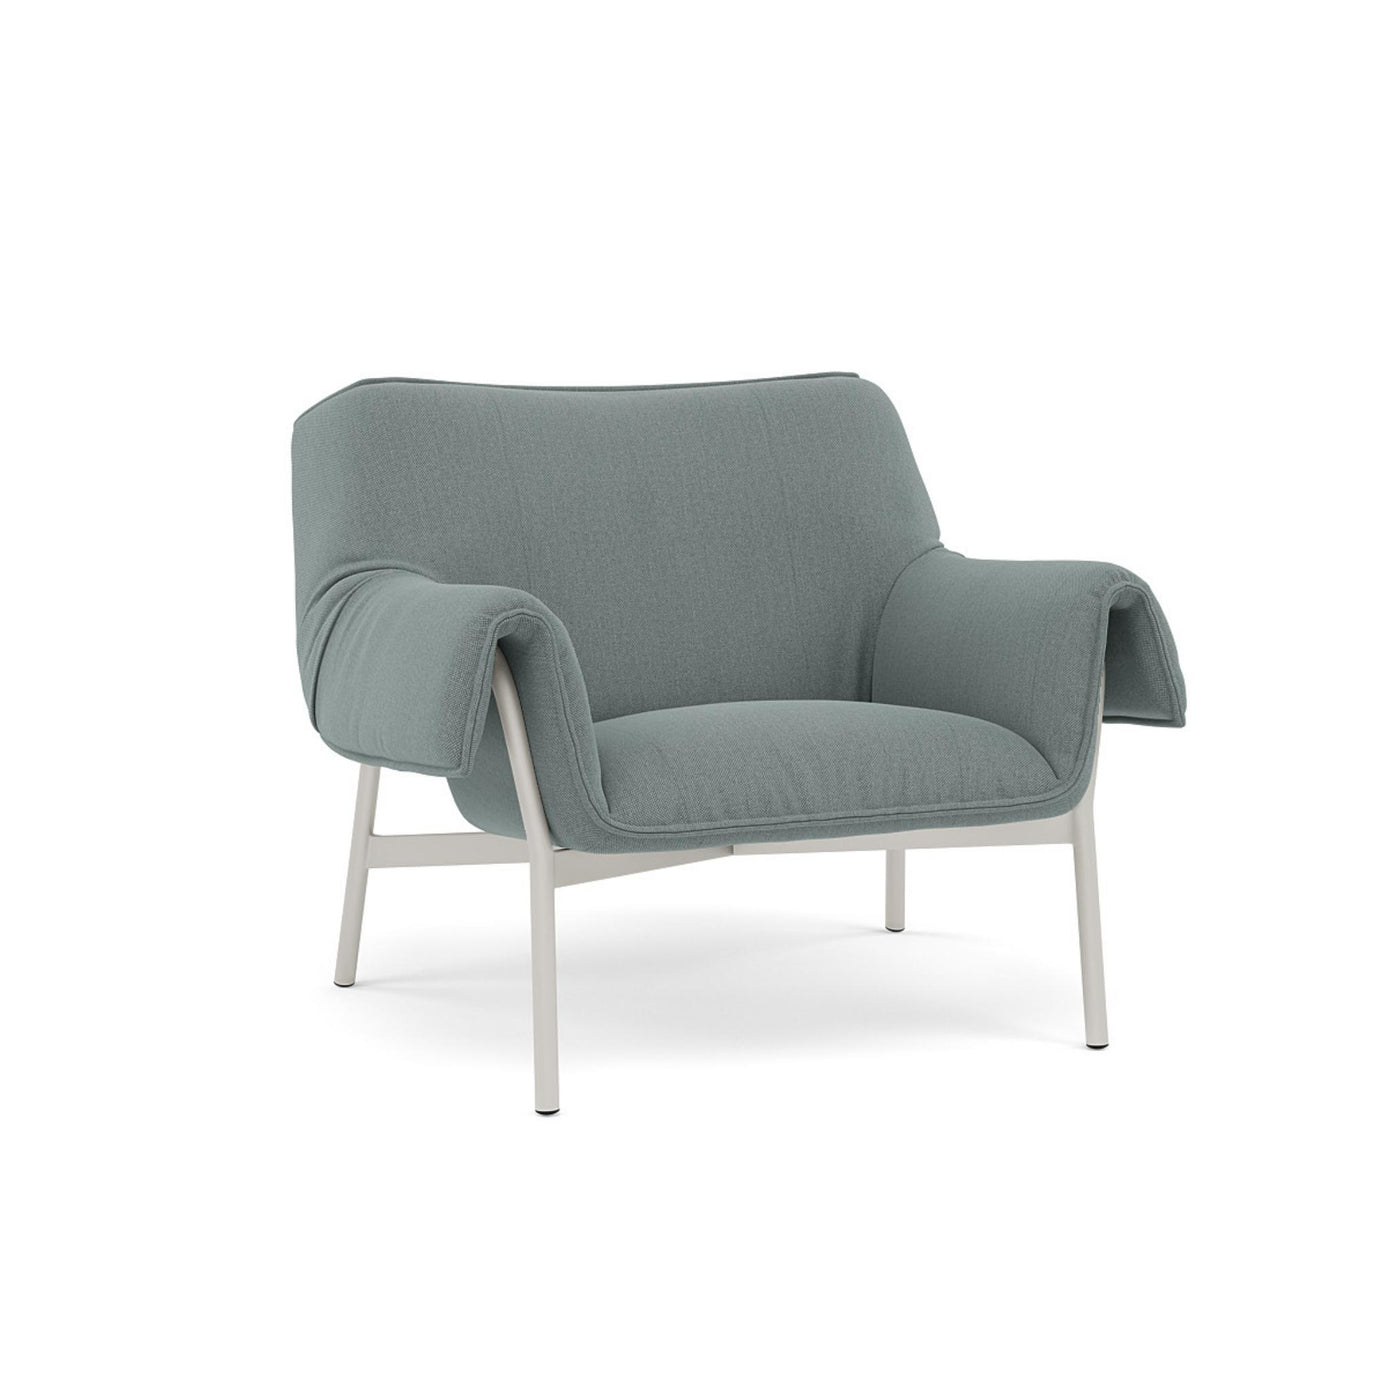 Muuto Wrap Lounge Chair. Made to order from someday designs. #colour_re-wool-868